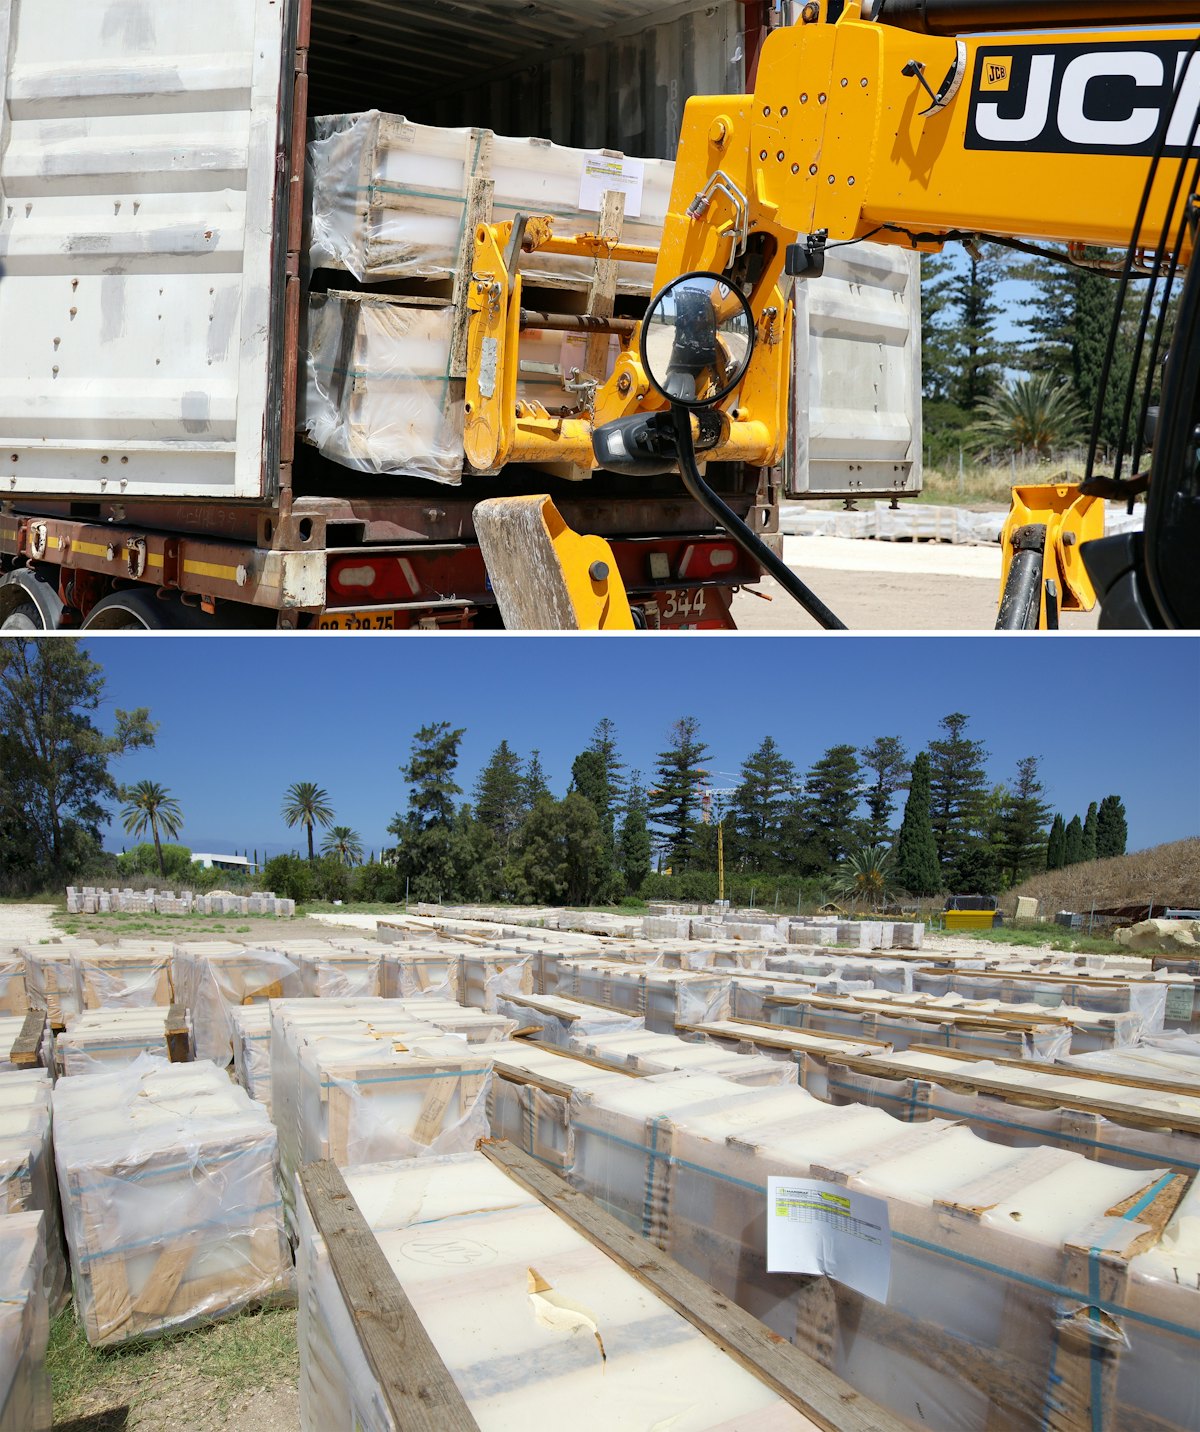 Marble from Italy that will adorn the trellis, once the concrete structure is complete, has arrived and is being stored on the site.